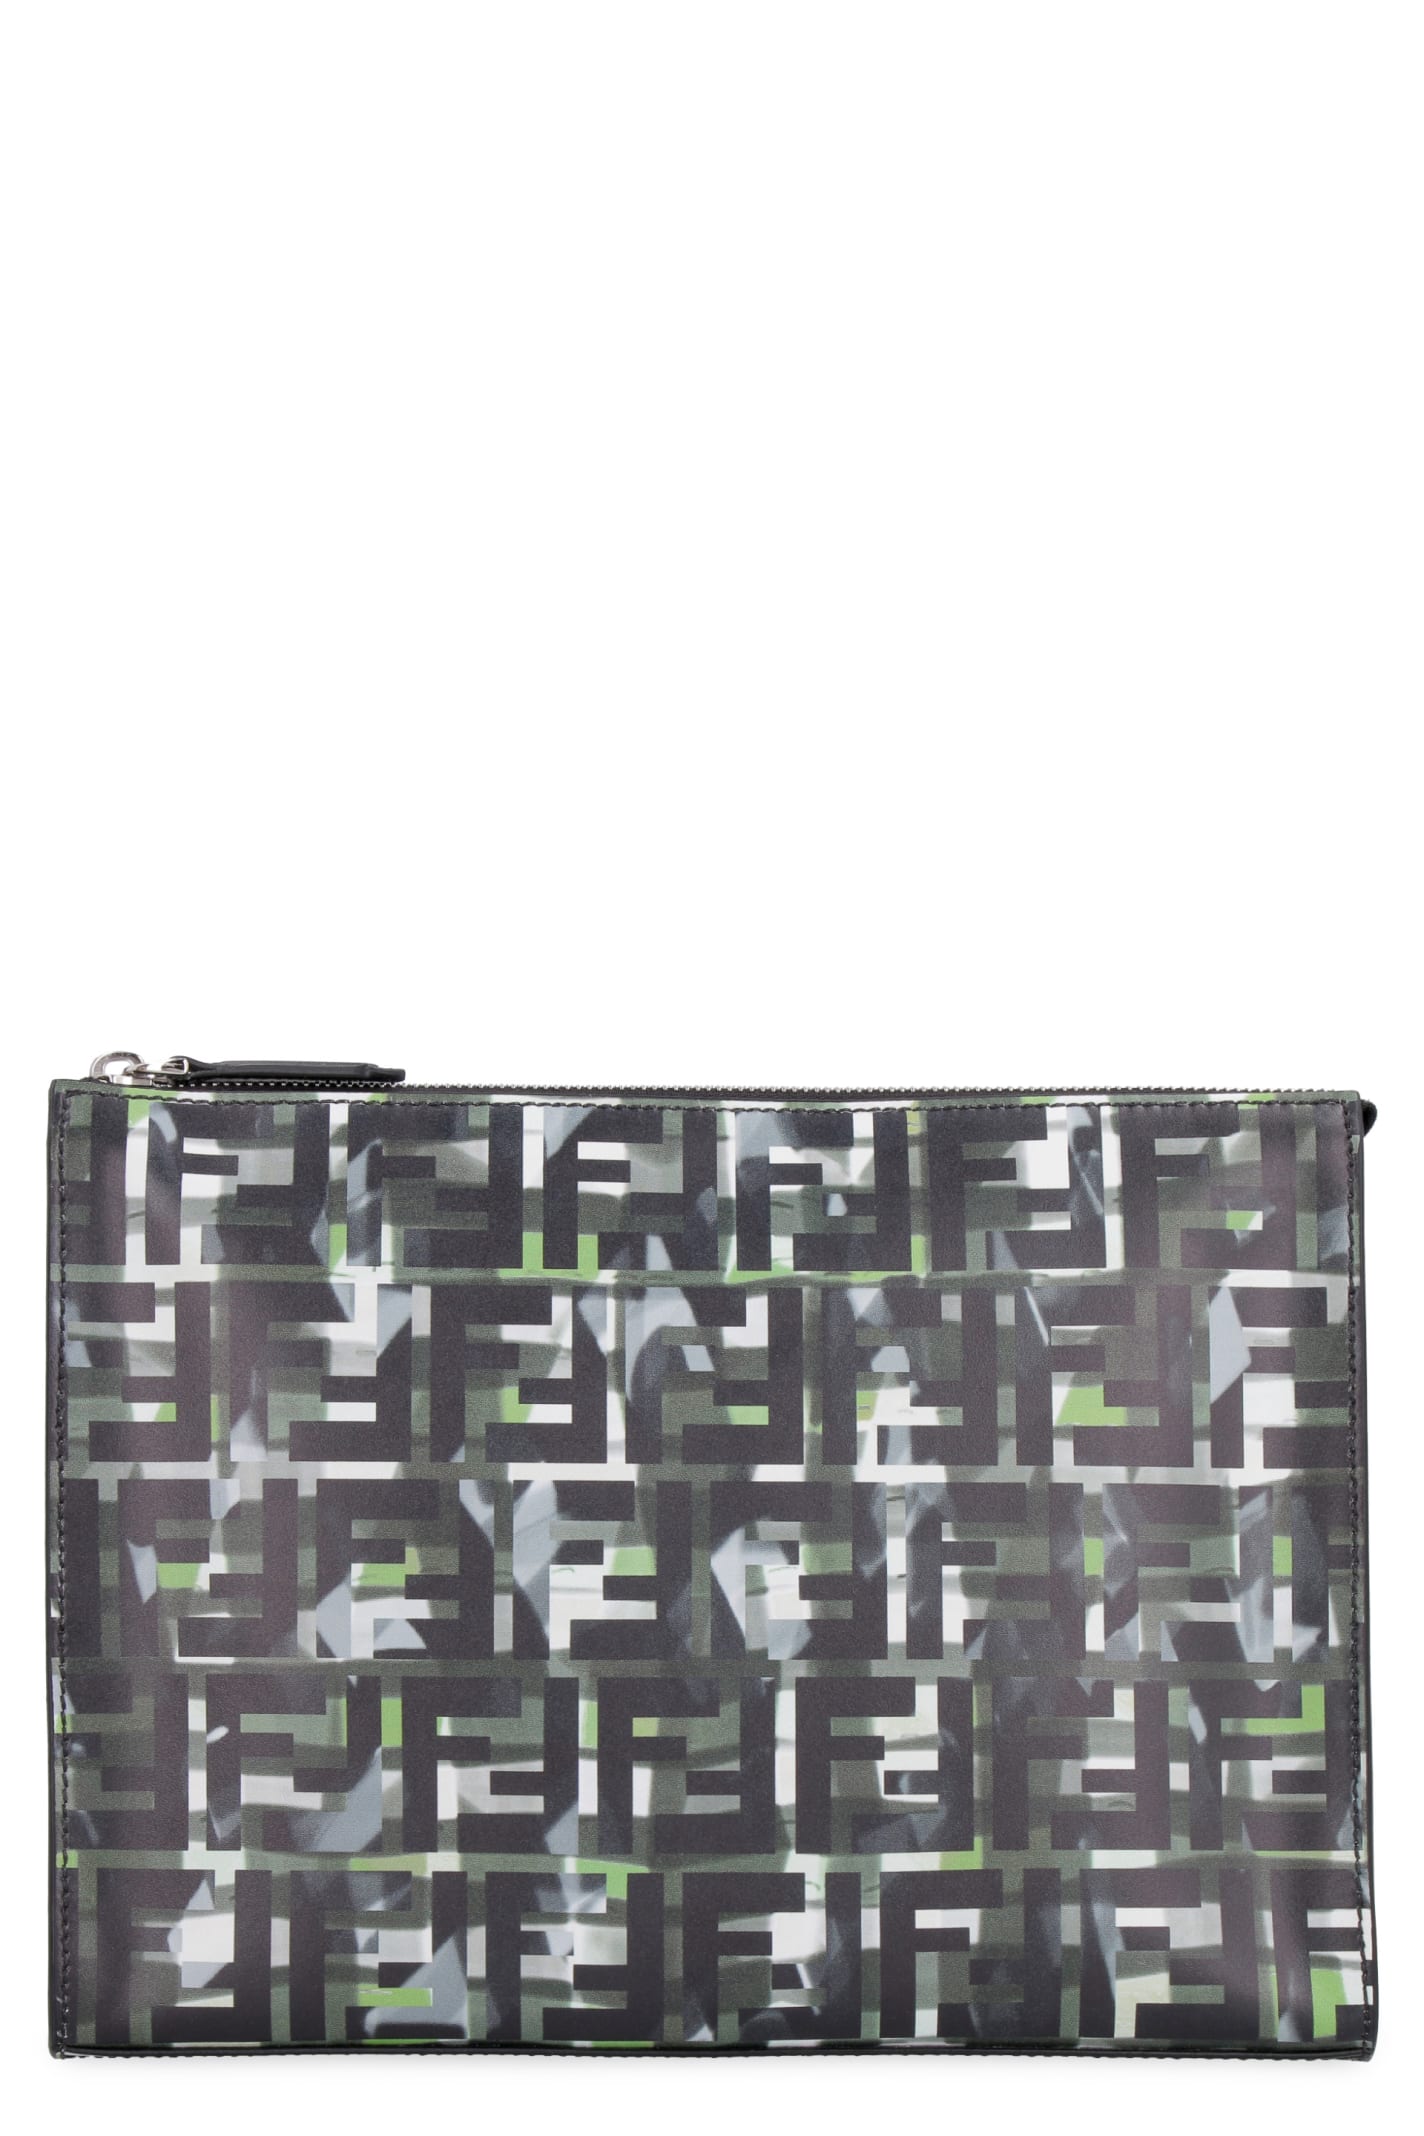 FENDI PRINTED CALF LEATHER POUCH